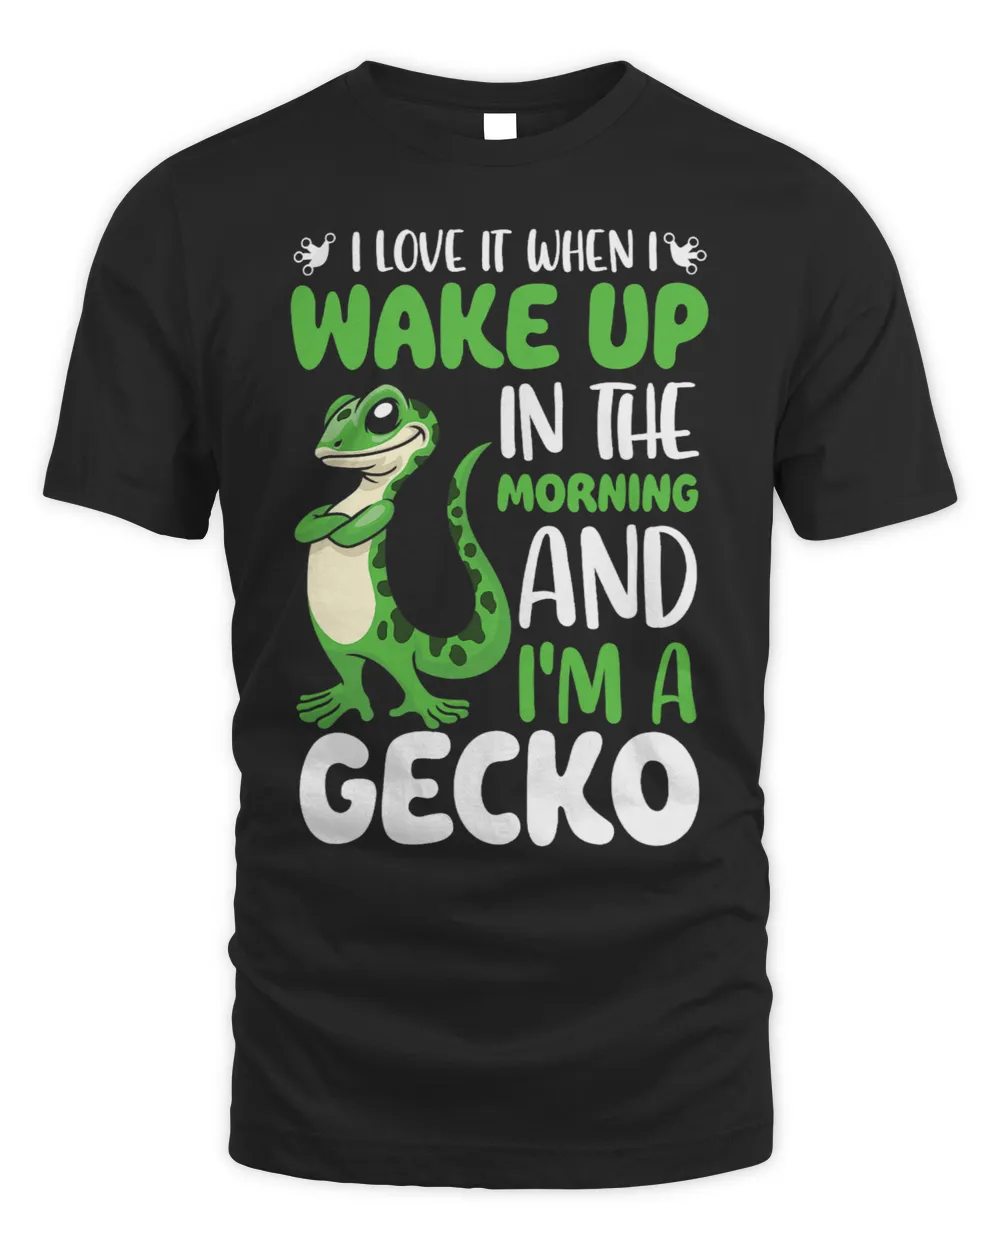 I love it when I wake up in the morning and Im a Gecko